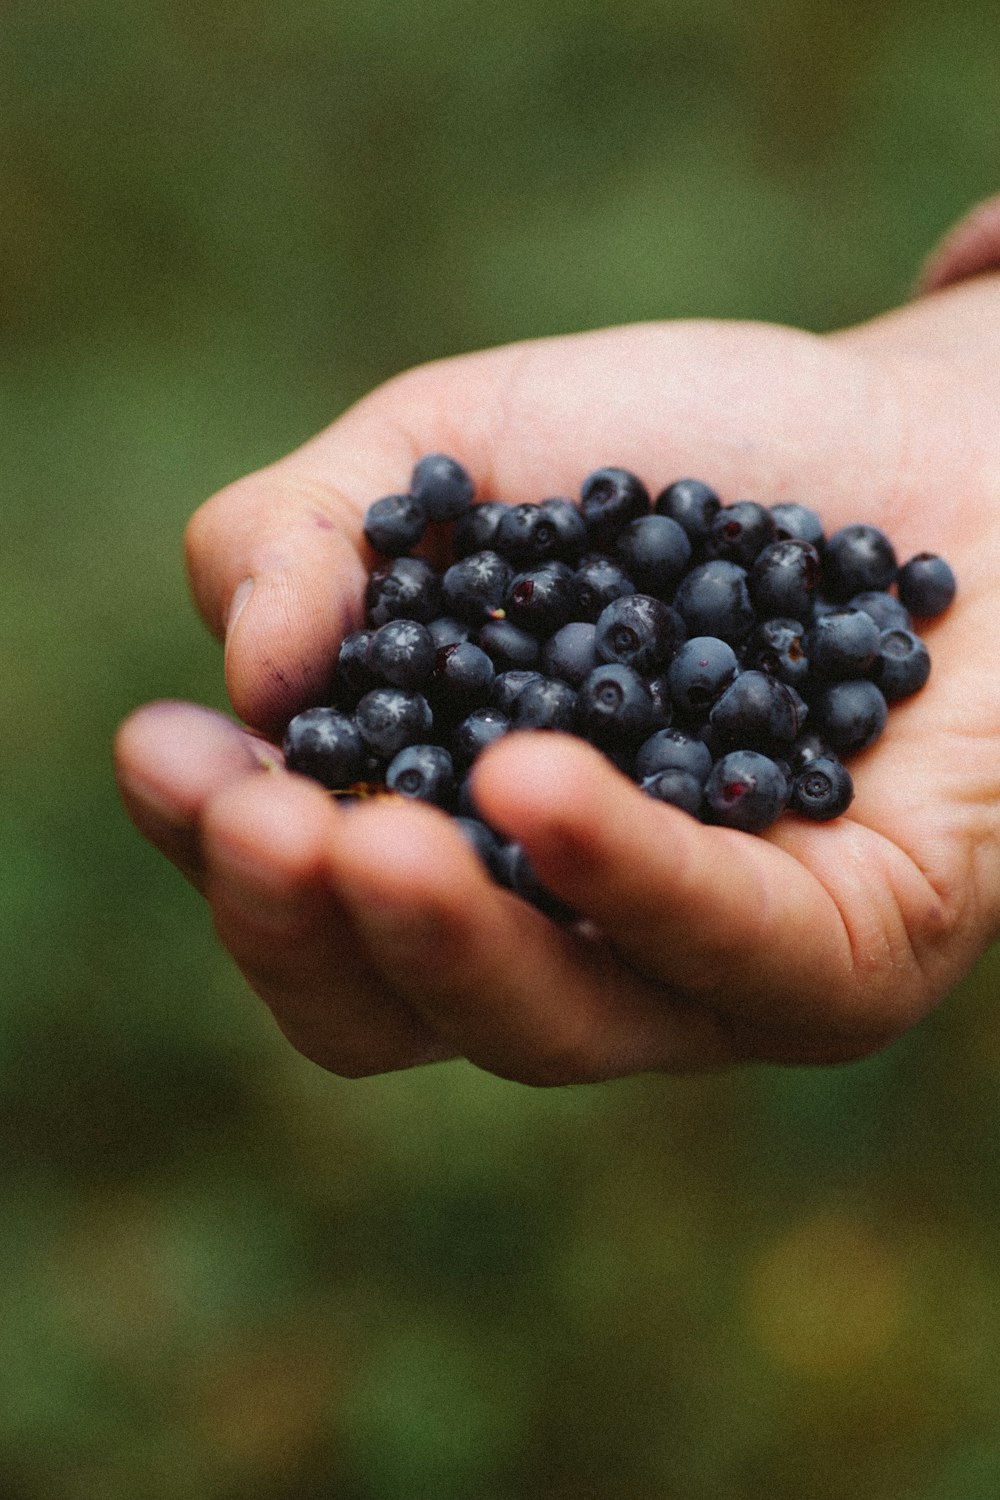 person holding black round fruits